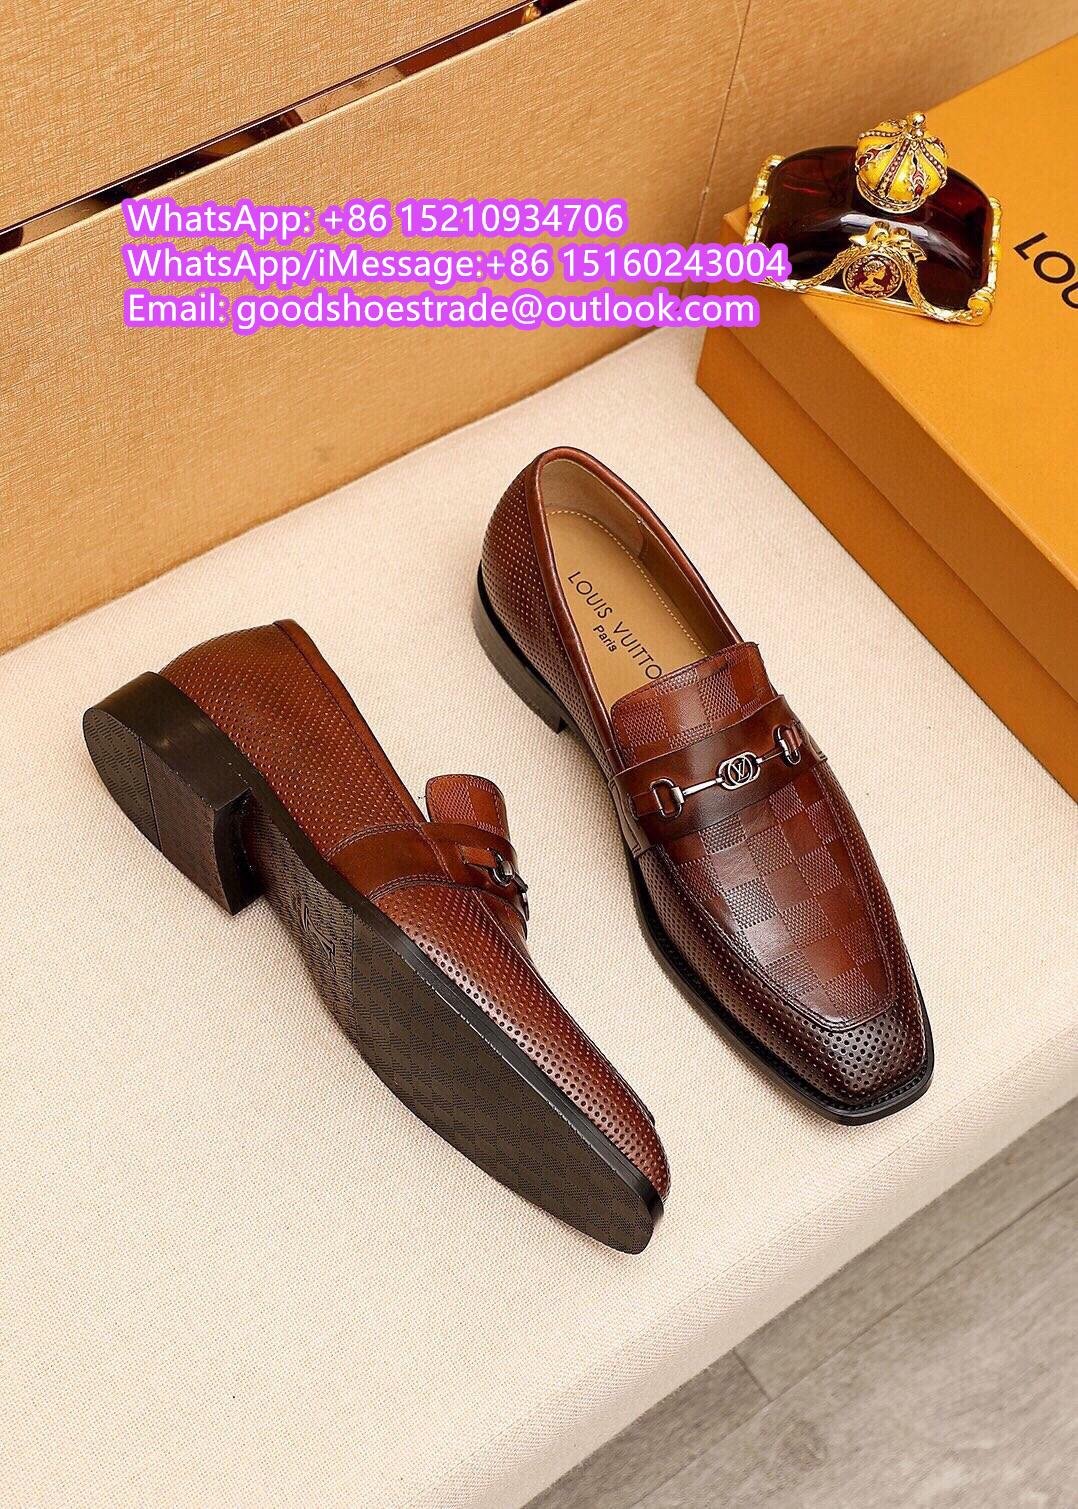     river Moccasin     oafer     eather shoes     ress shoes leisure shoes LV 4